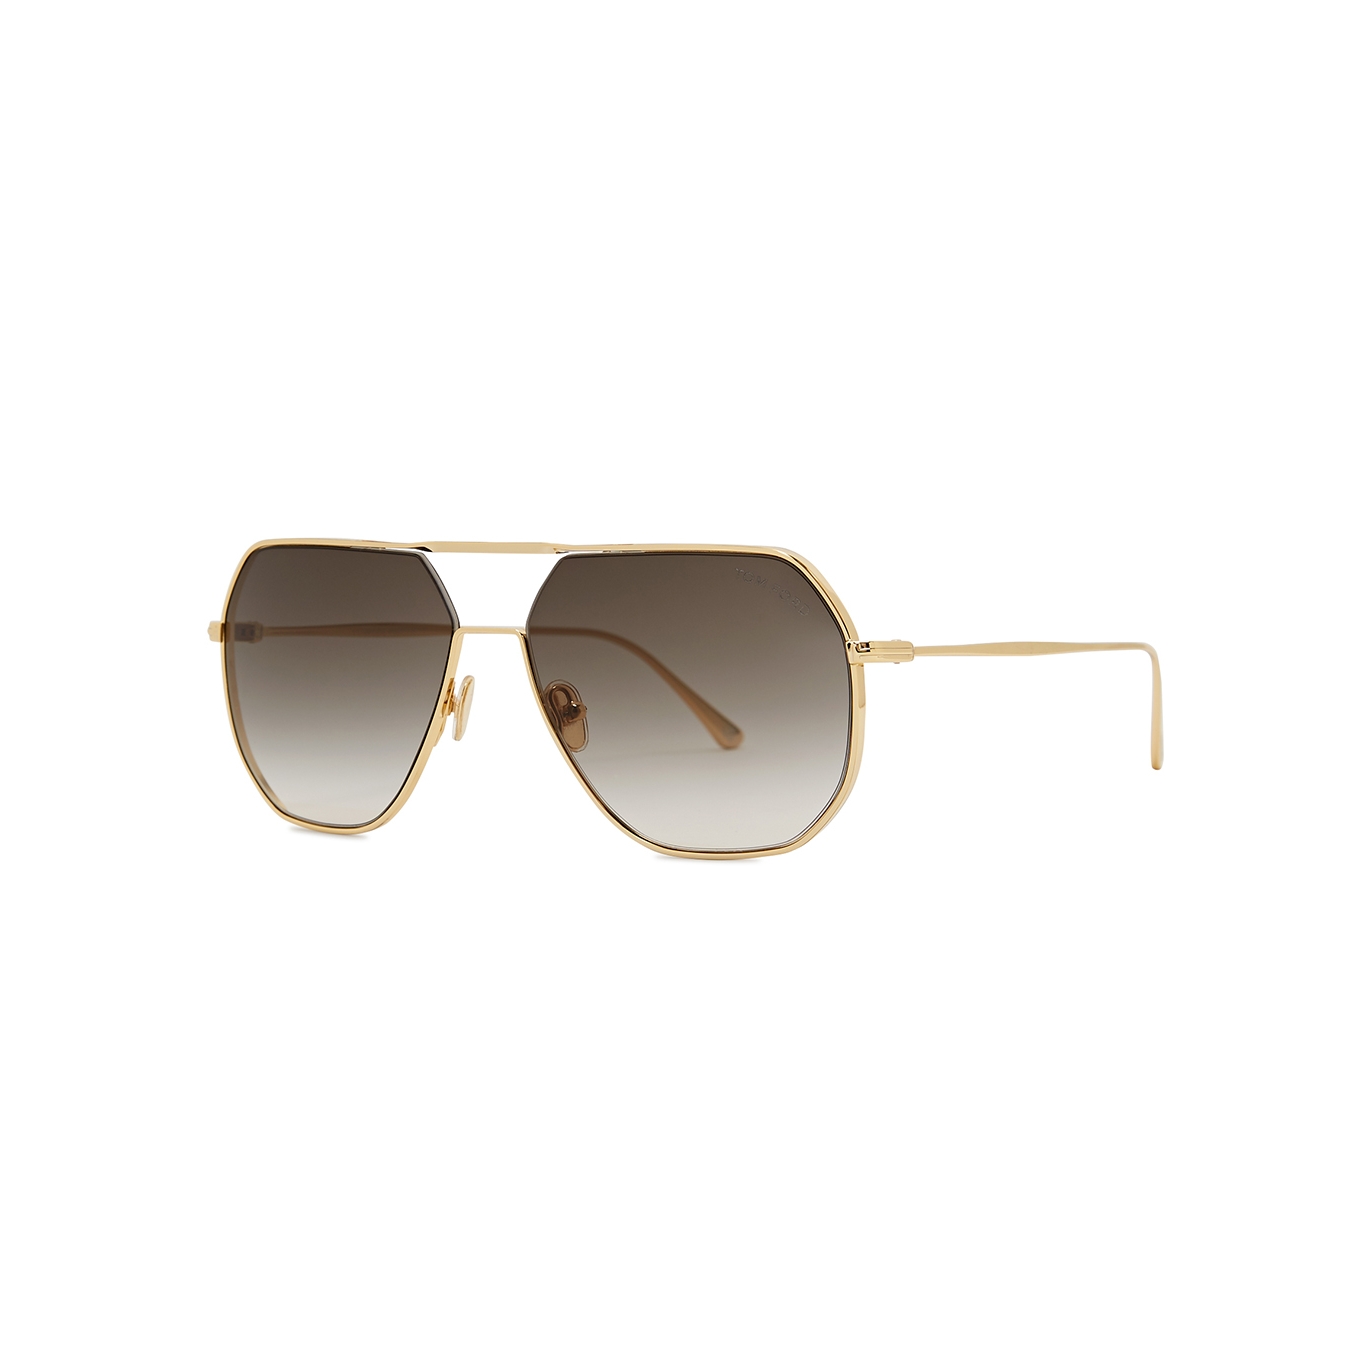 Tom Ford Gilles-02 Gold-Tone Aviator-Style Sunglasses